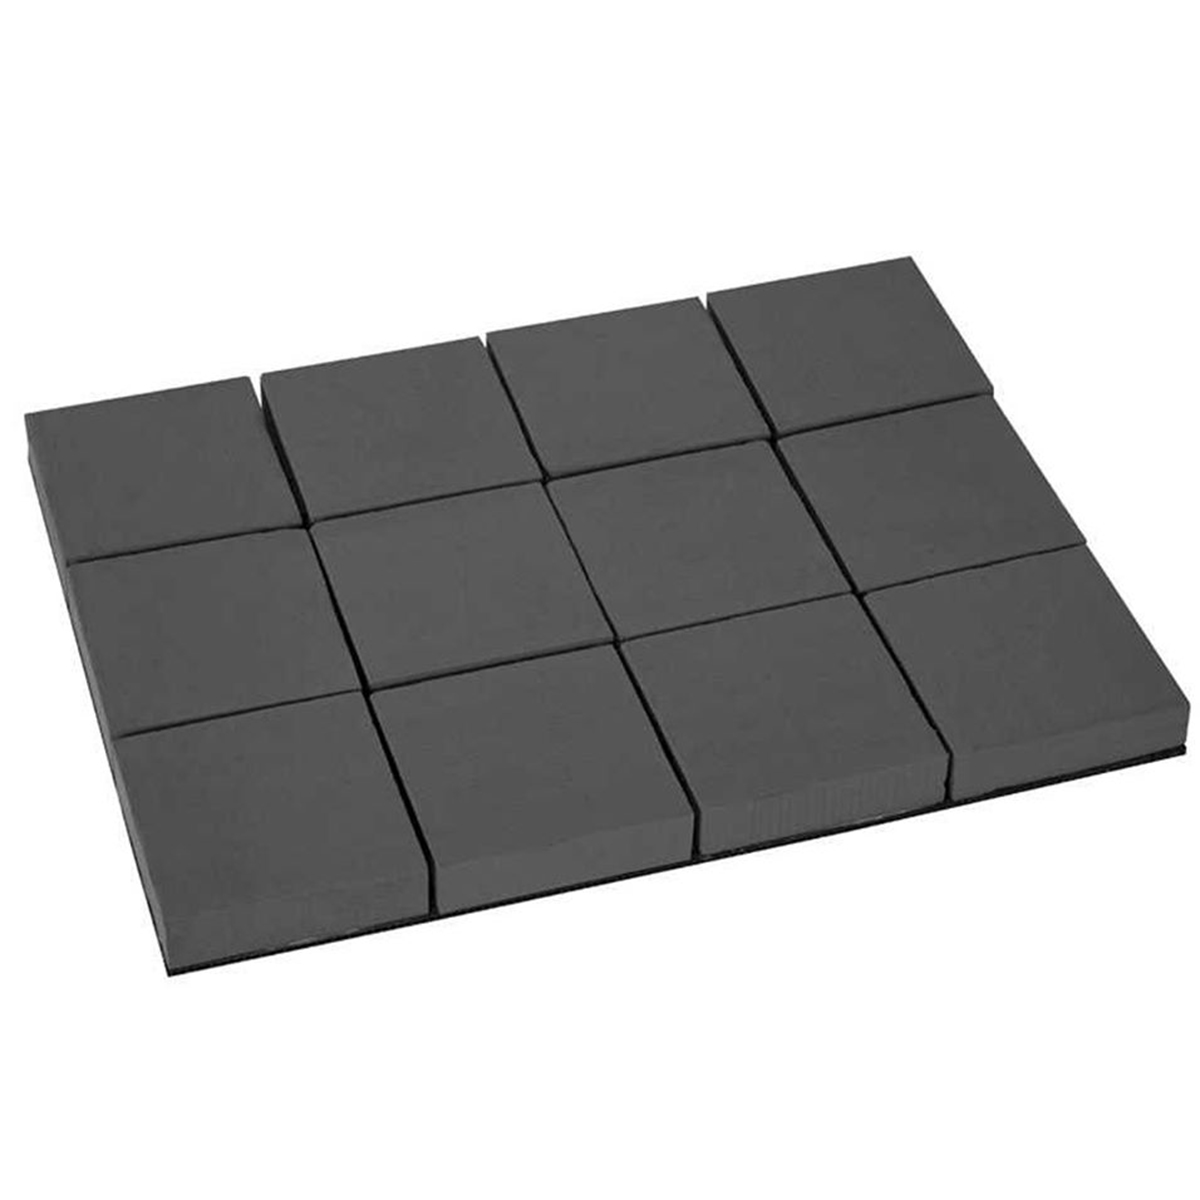 Smithers-Oasis Maxlife Midnight Floral Foam Tile 1